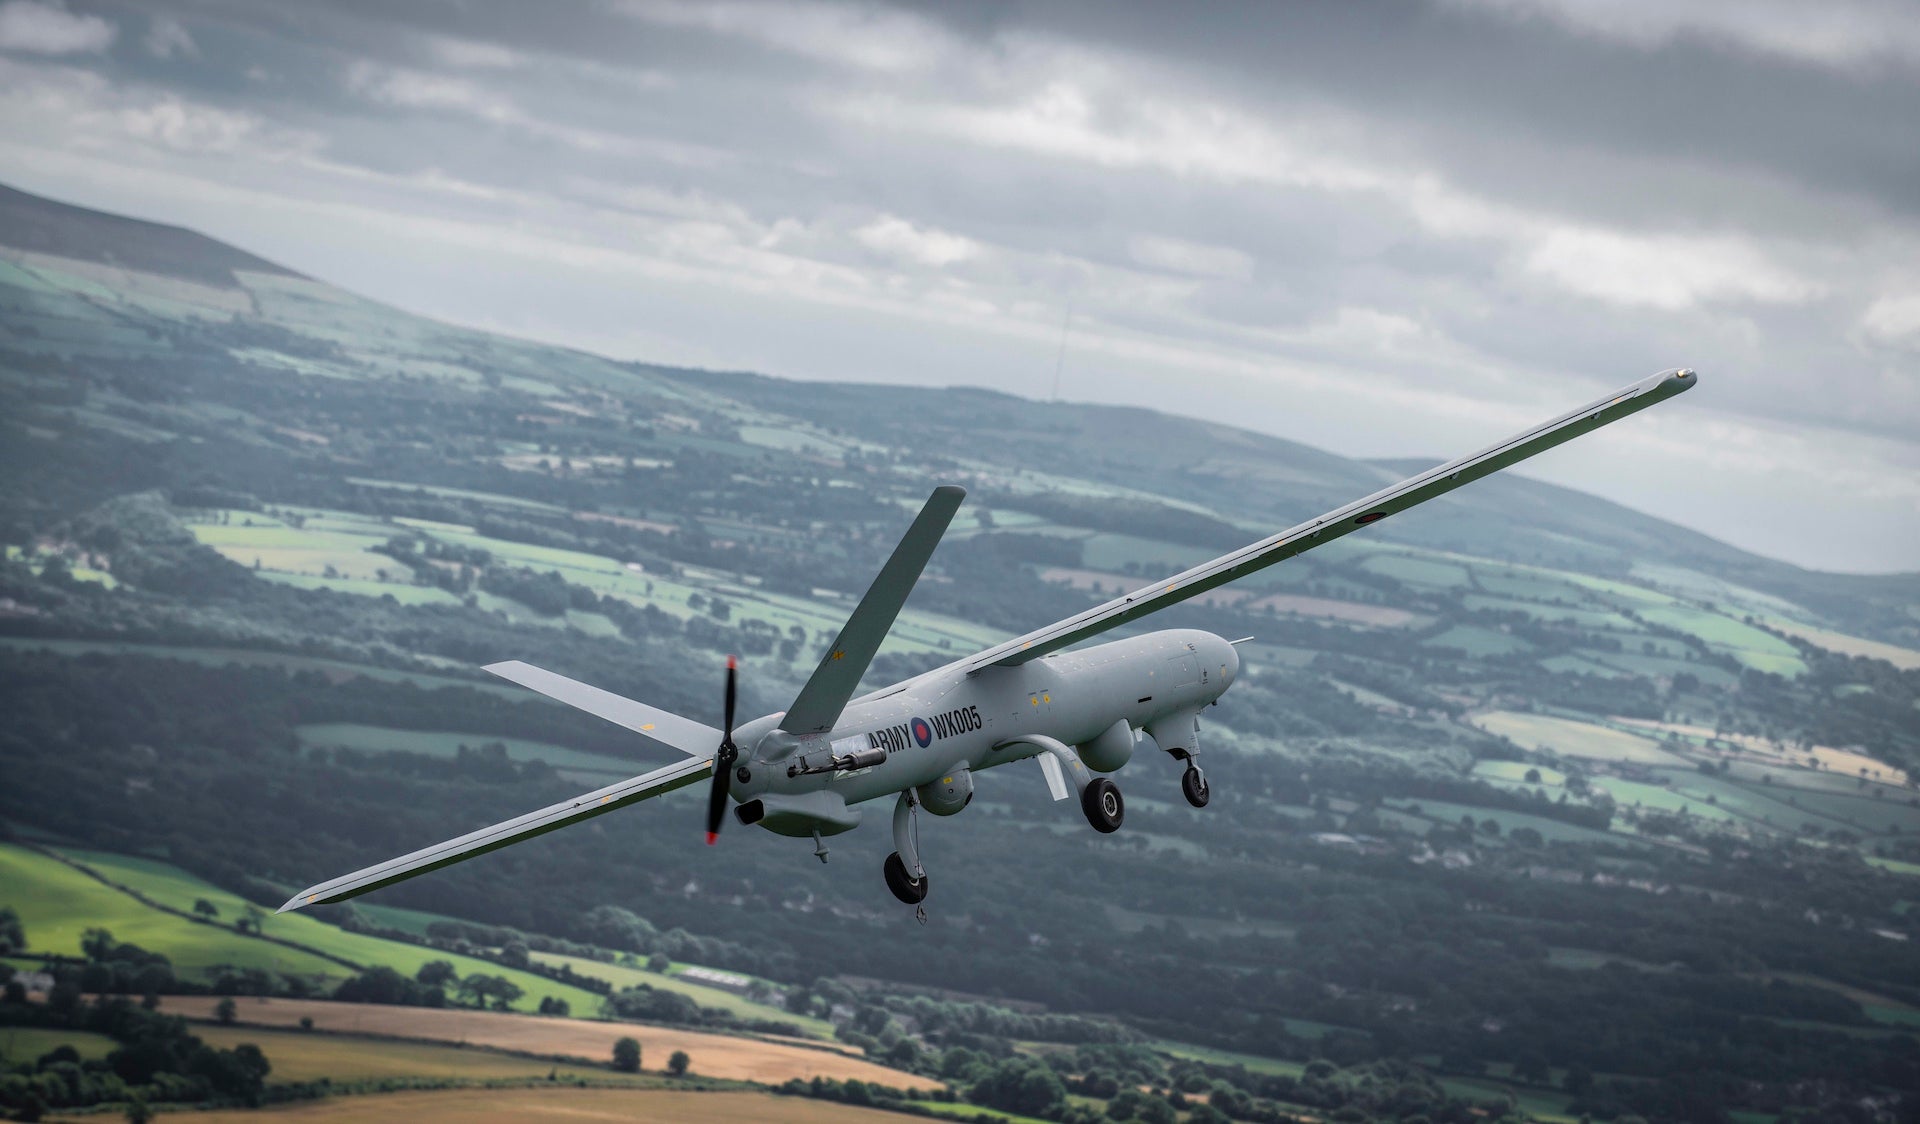 A Watchkeeper WK450 Remotely Piloted Air System RPAS in flight over the UK during a test flight.  

Watchkeeper is an unmanned aerial vehicle (UAV) for all weather, Intelligence, Surveillance, Target Acquisition and Reconnaissance (ISTAR).

Watchkeeper provides enhanced UAV capability that will enable commanders to detect and track targets for long periods, without the need to deploy troops into potentially sensitive or dangerous areas. The system is capable of rapid deployment and operations anywhere in the world and will support the information requirements of all three services.